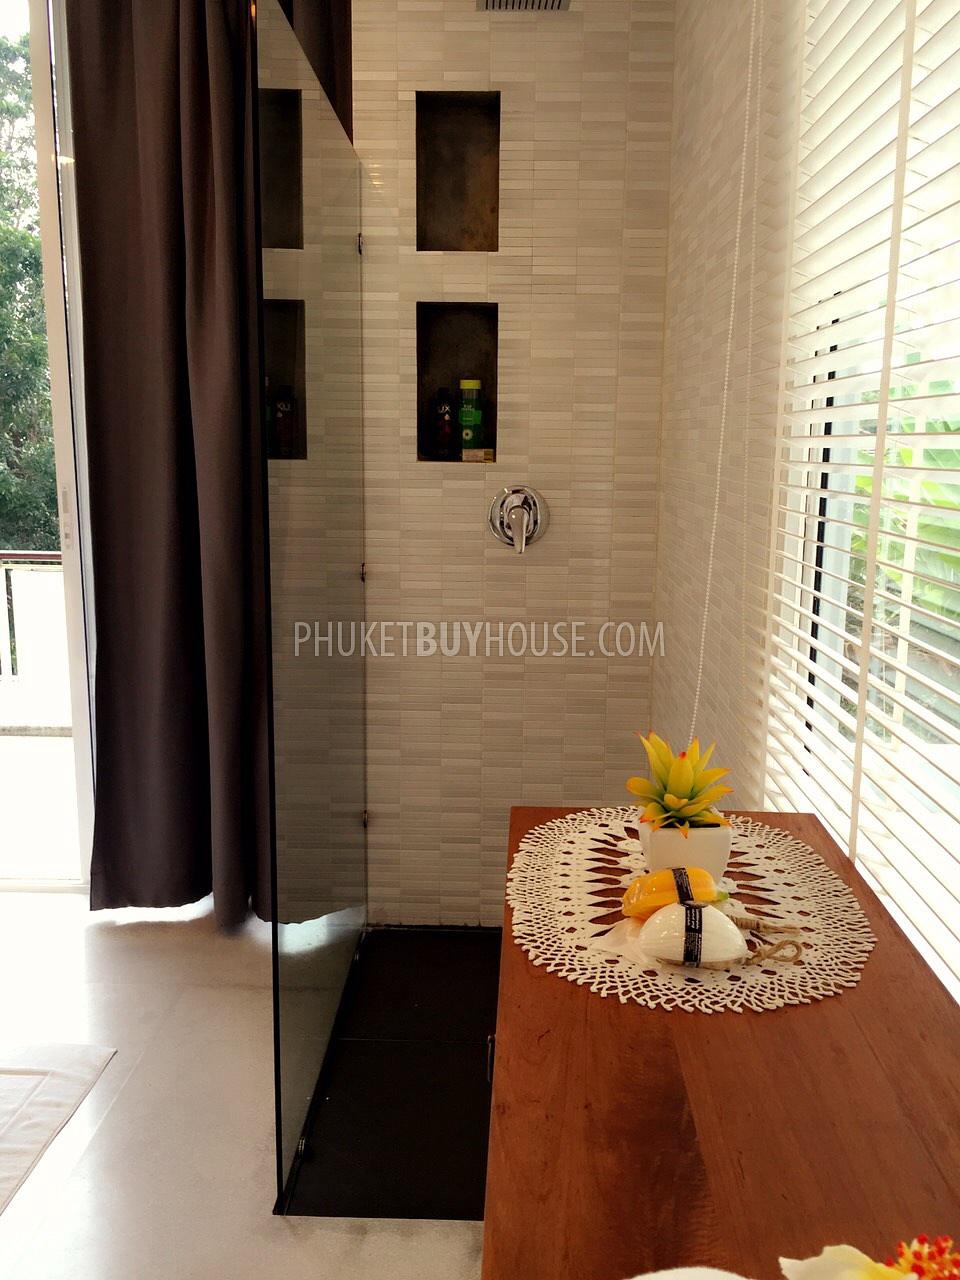 CHA2317: Luxury 3 bedroom Villa with private swimming pool and elegant sunbathing area in Chalong. Photo #4